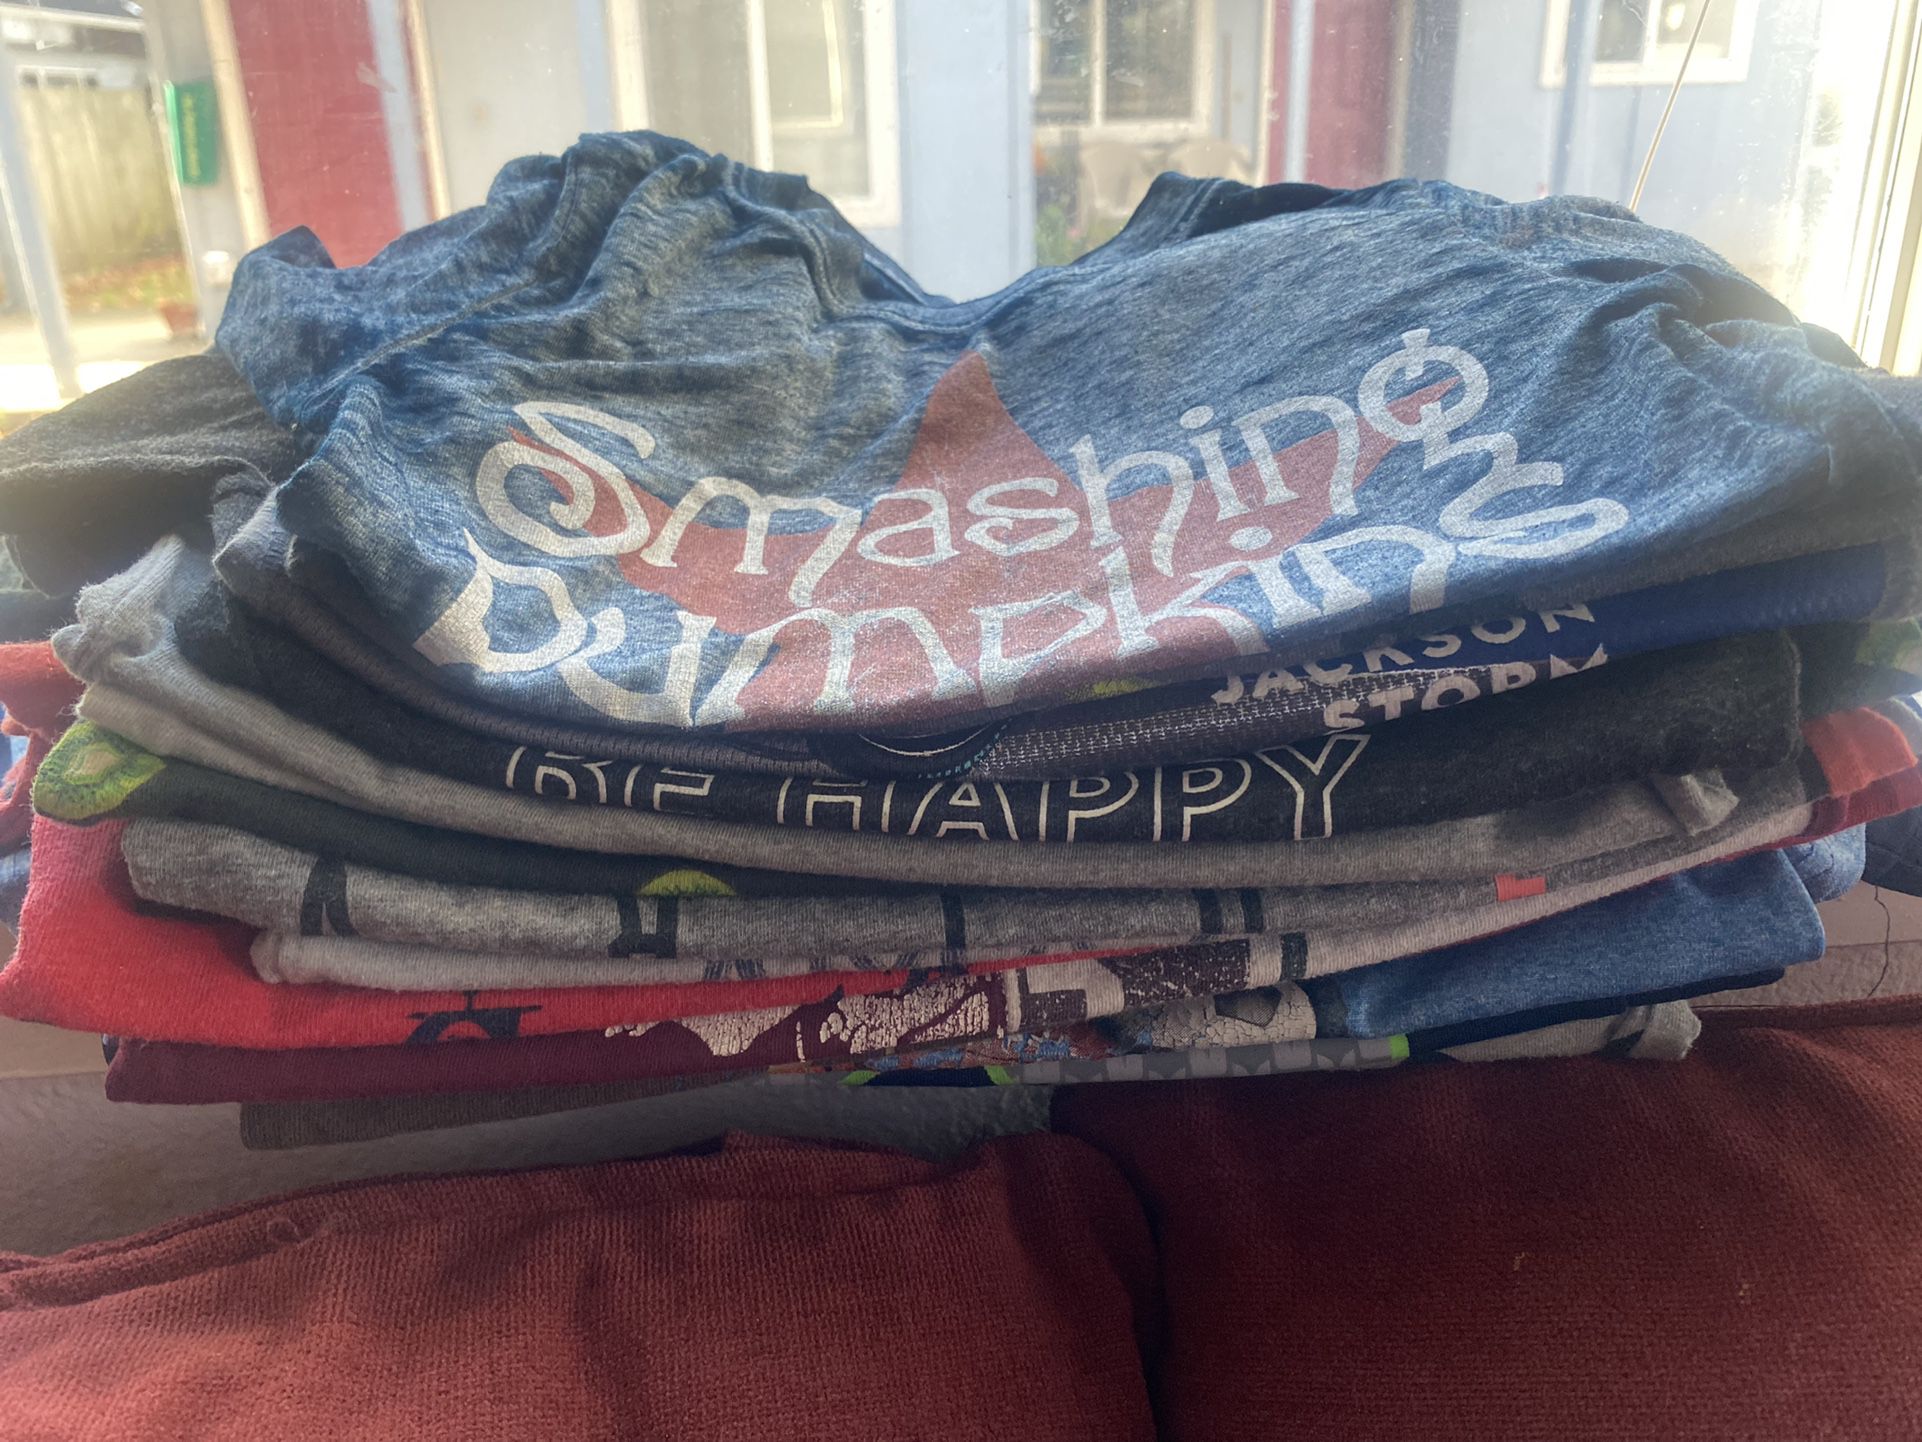 2T 3T & Some 4T Boys Clothing Lot